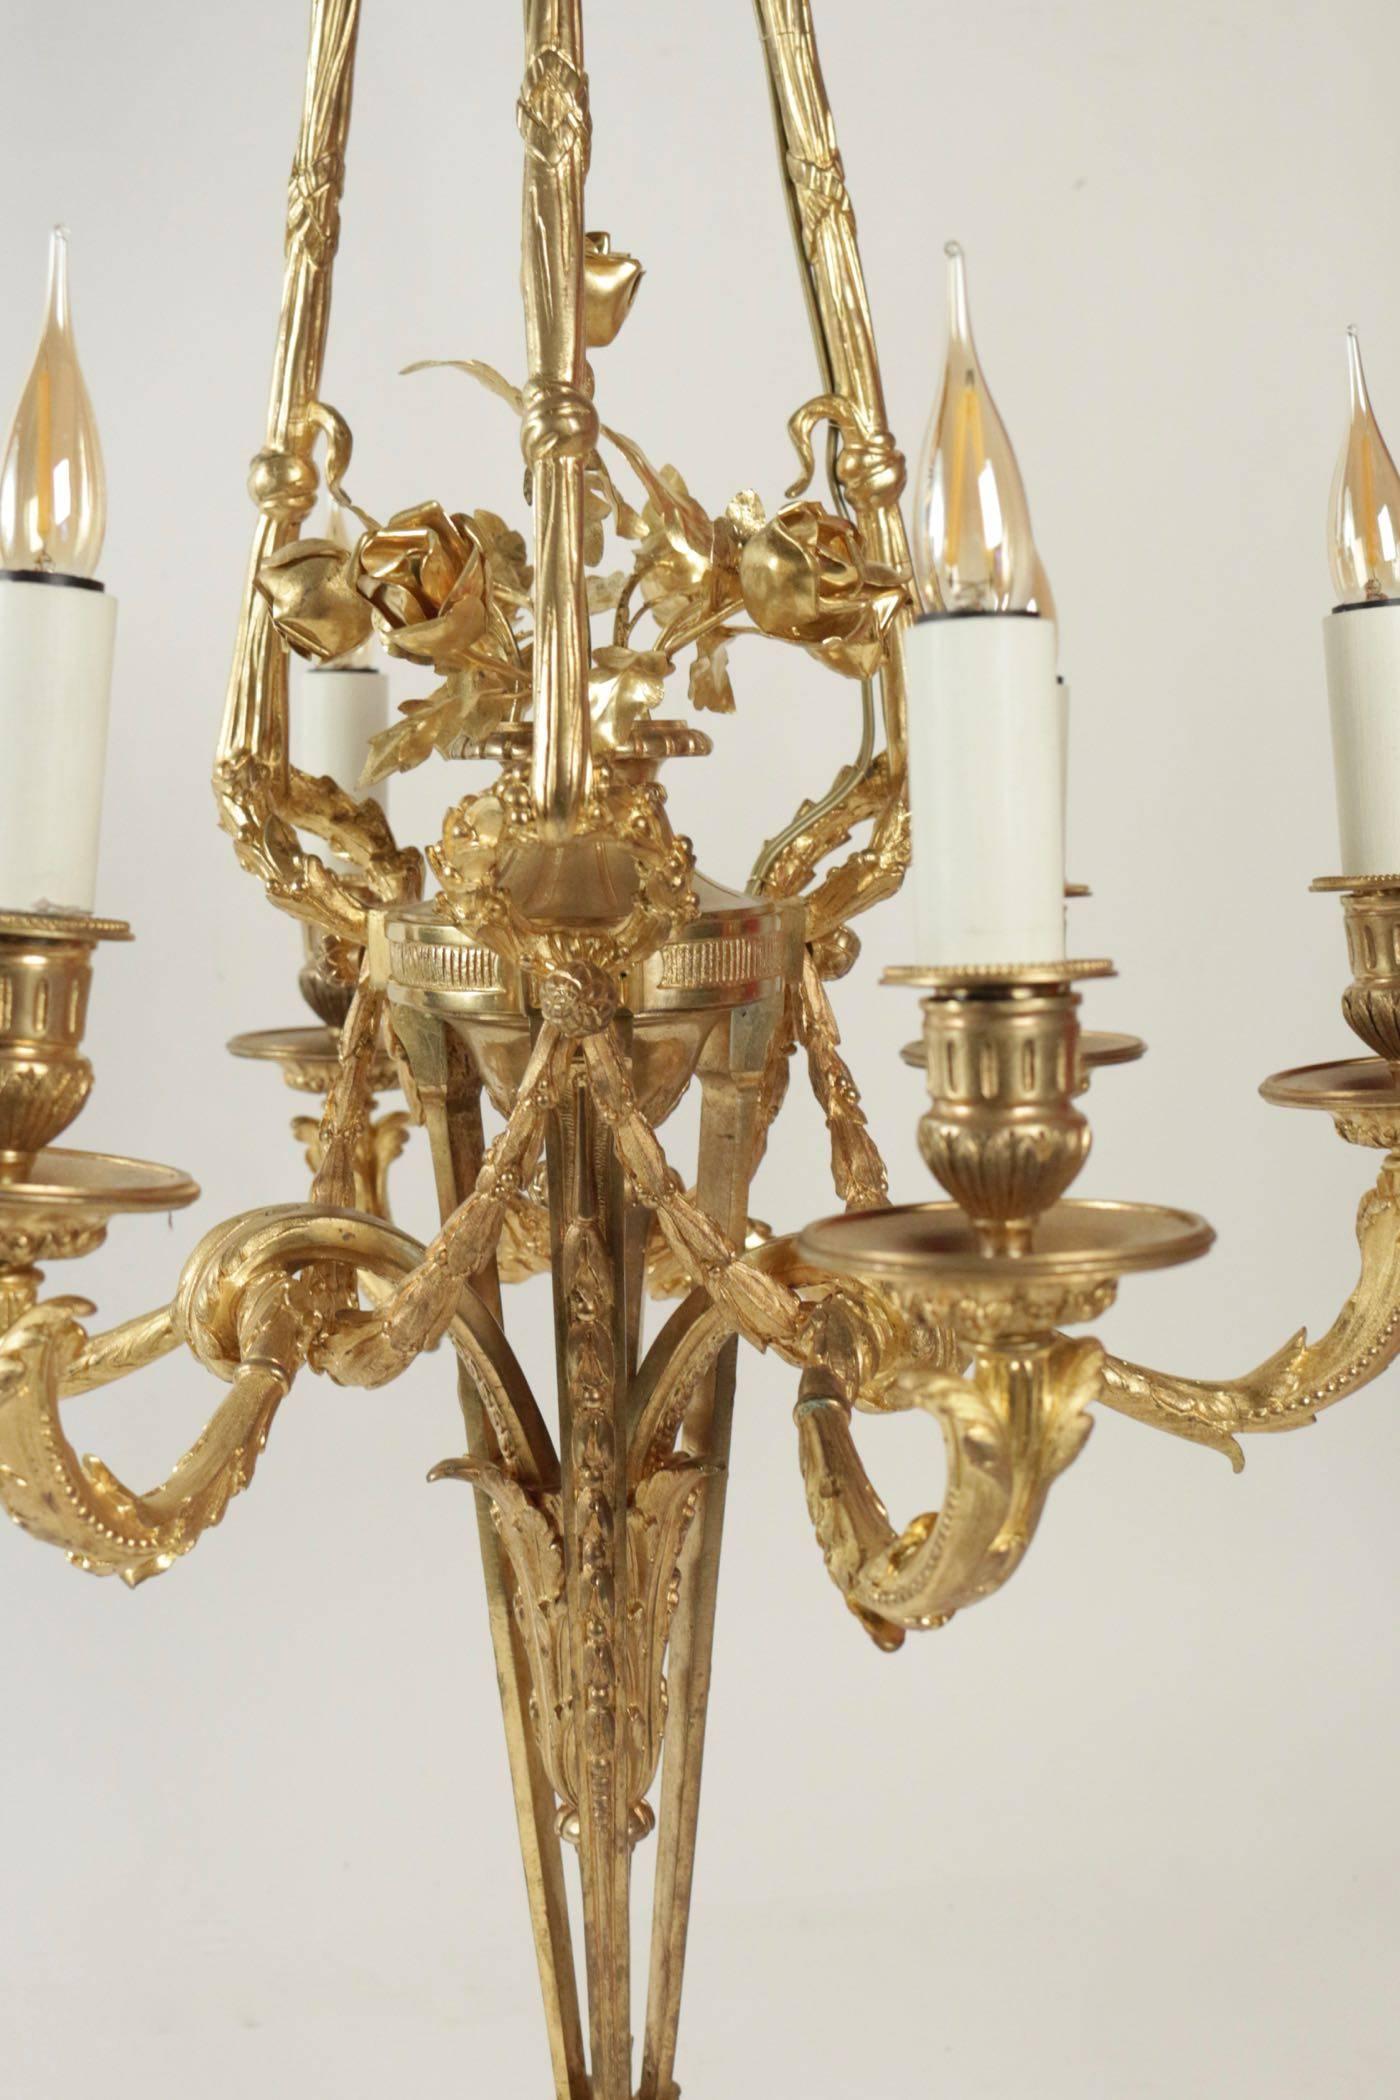 Louis XVI style gold gilt on bronze 19th century period Napoleon III chandelier with six arms.
Measure: H 85cm, D 54cm.
 
 